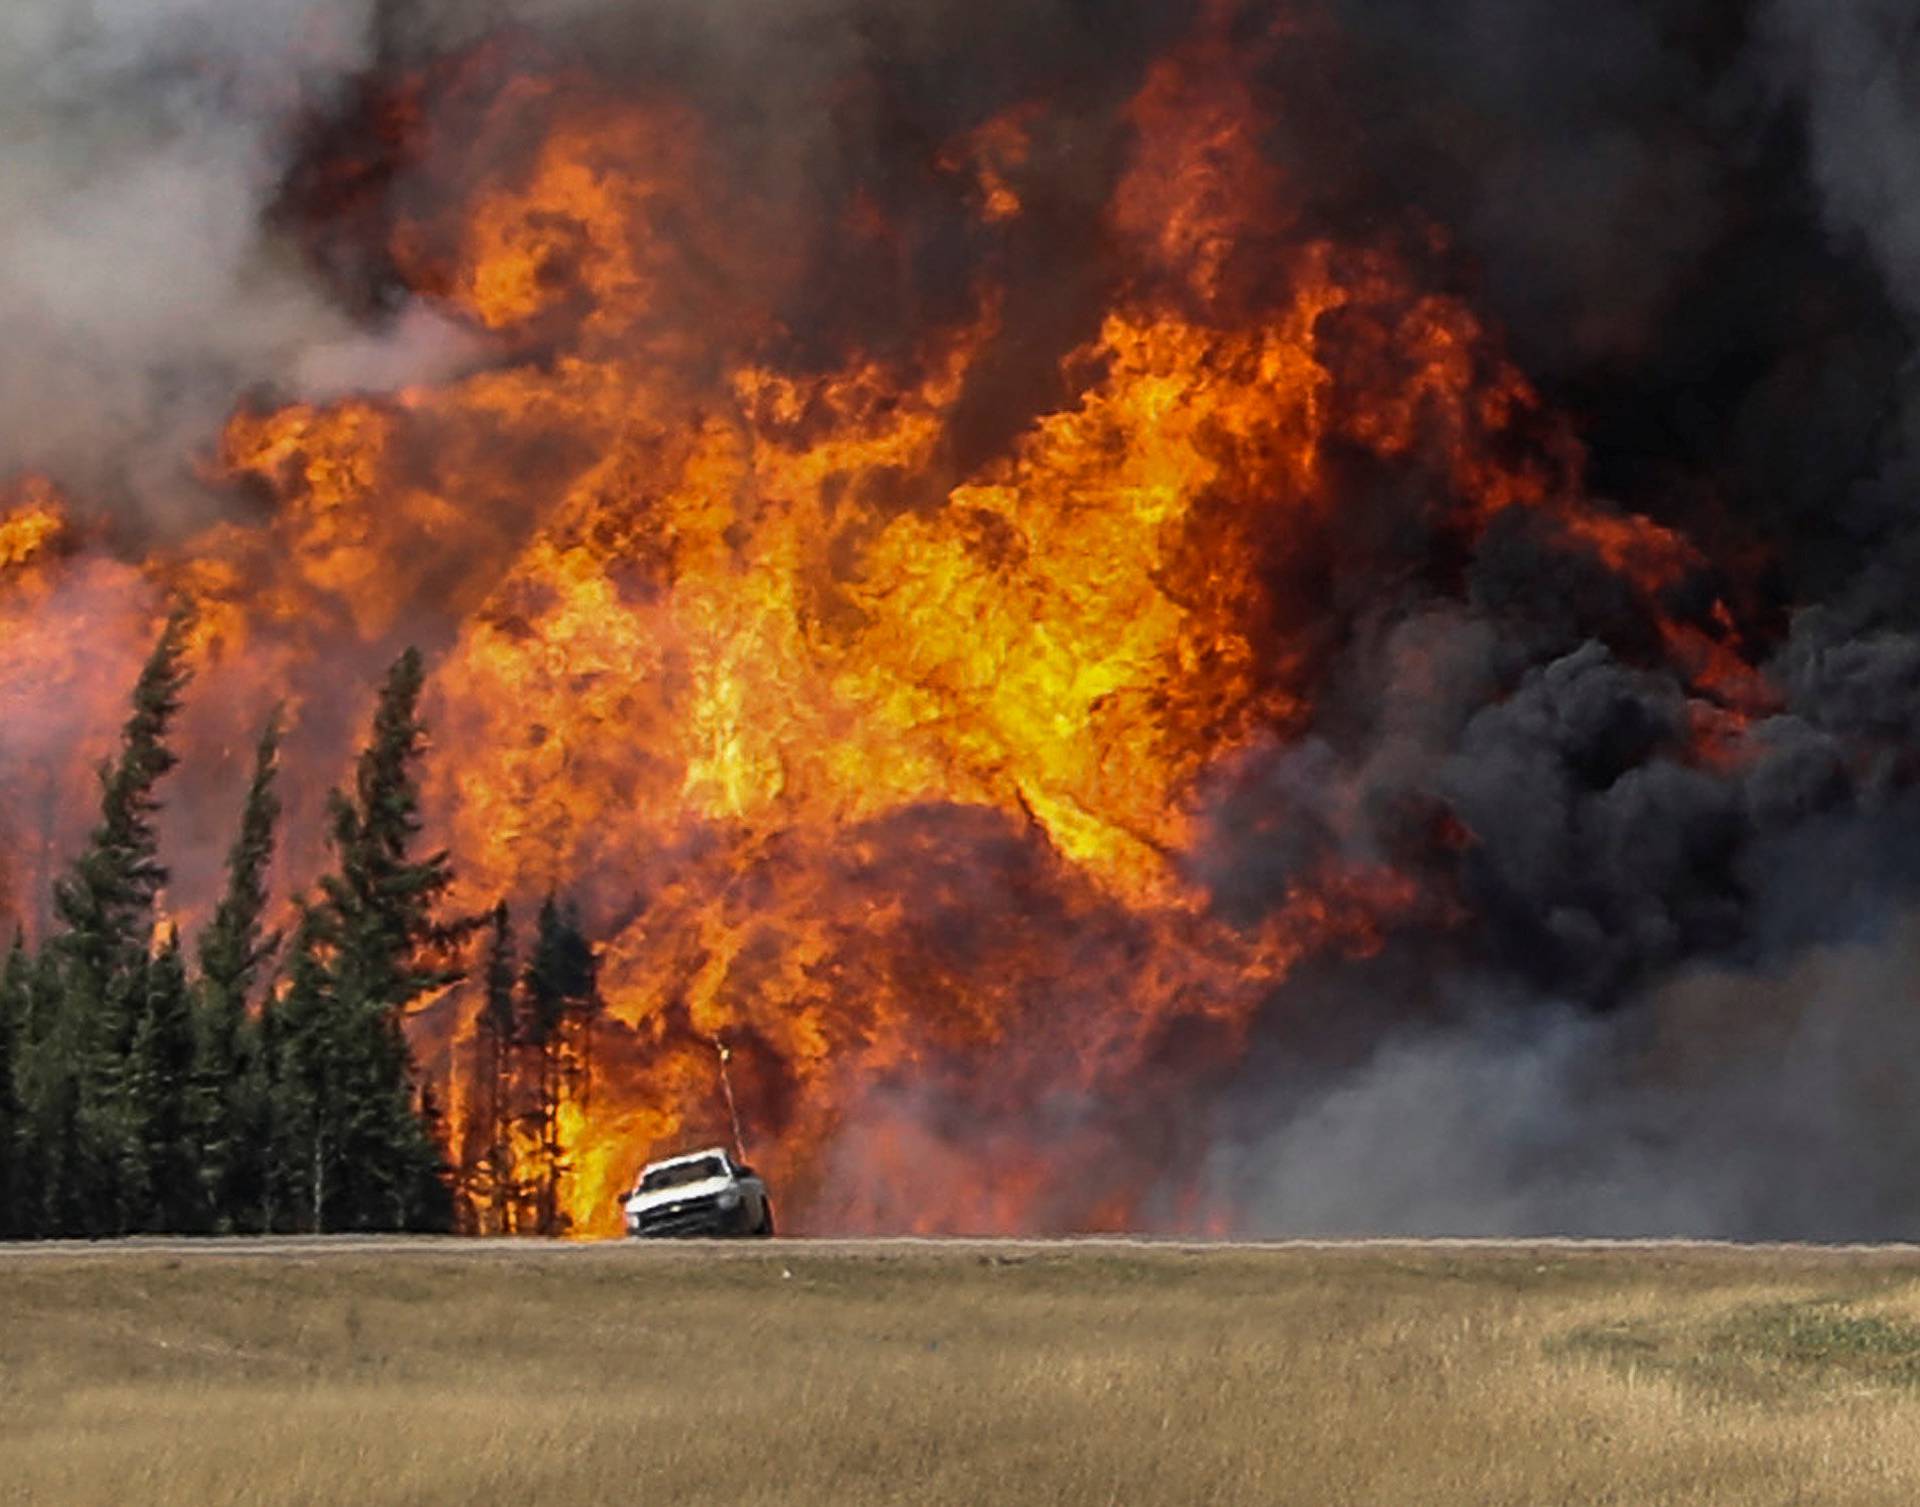 Smoke and flames from the wildfires erupt behind a car on the highway near Fort McMurray